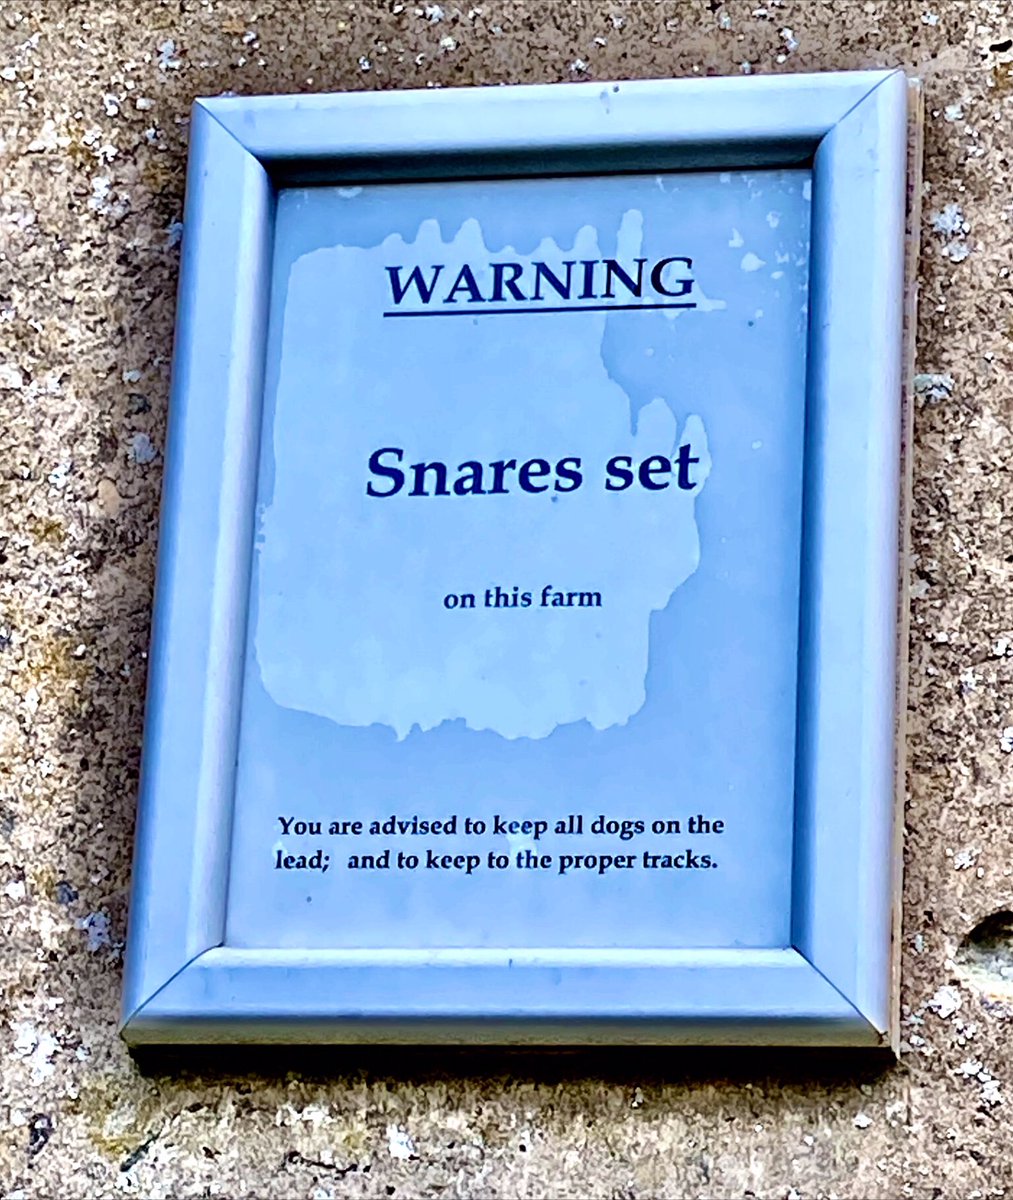 If, like me, you believe snares to be inhumane, causing unacceptable physical & psychological damage both to target species & accidentally caught animals please complete the short survey at consult.gov.scot/environment-fo… and consign signs like this to history @onekindtweet #BanSnaresNow